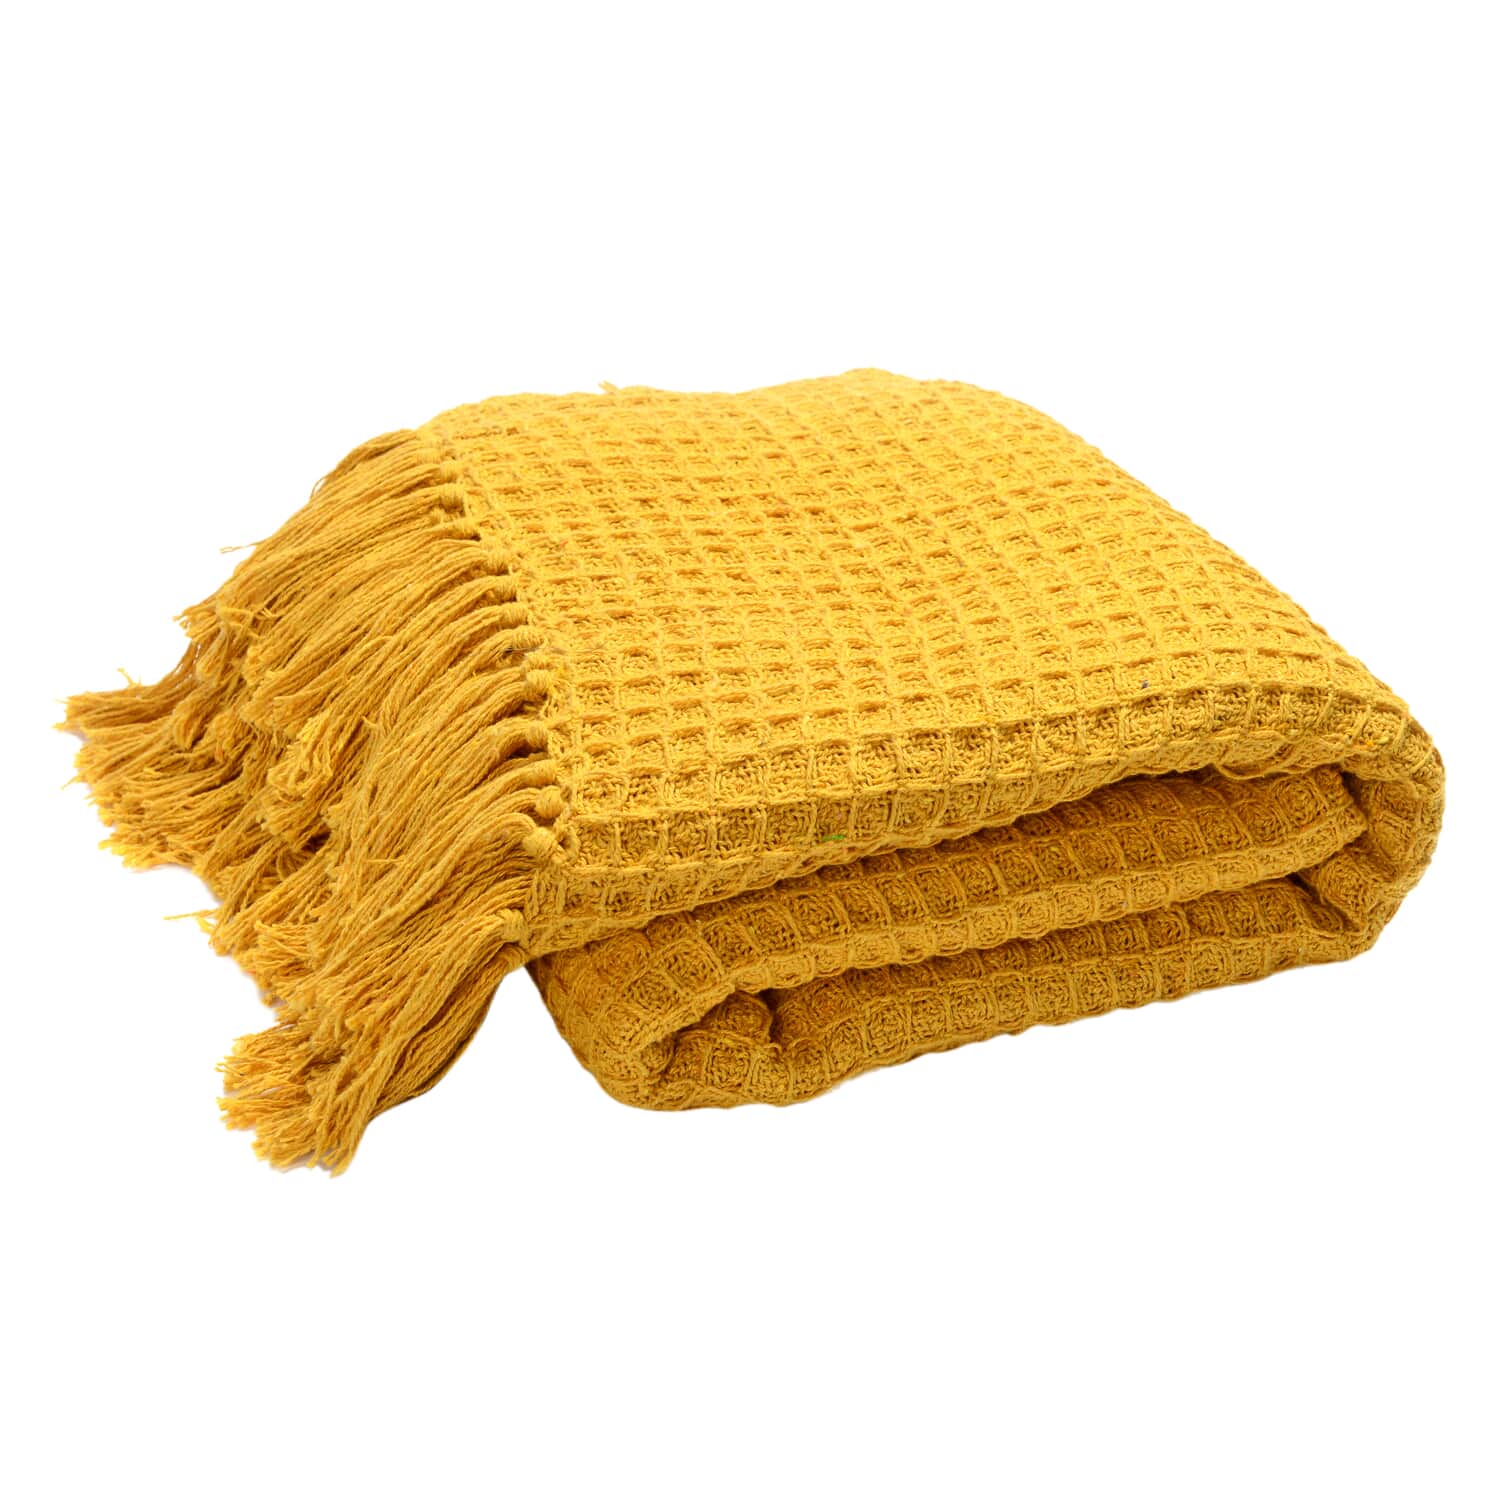 Shop LC Yellow Honeycomb Pattern Cotton Throw Super Soft with Tassels 70"X55" Birthday Gifts - image 1 of 12